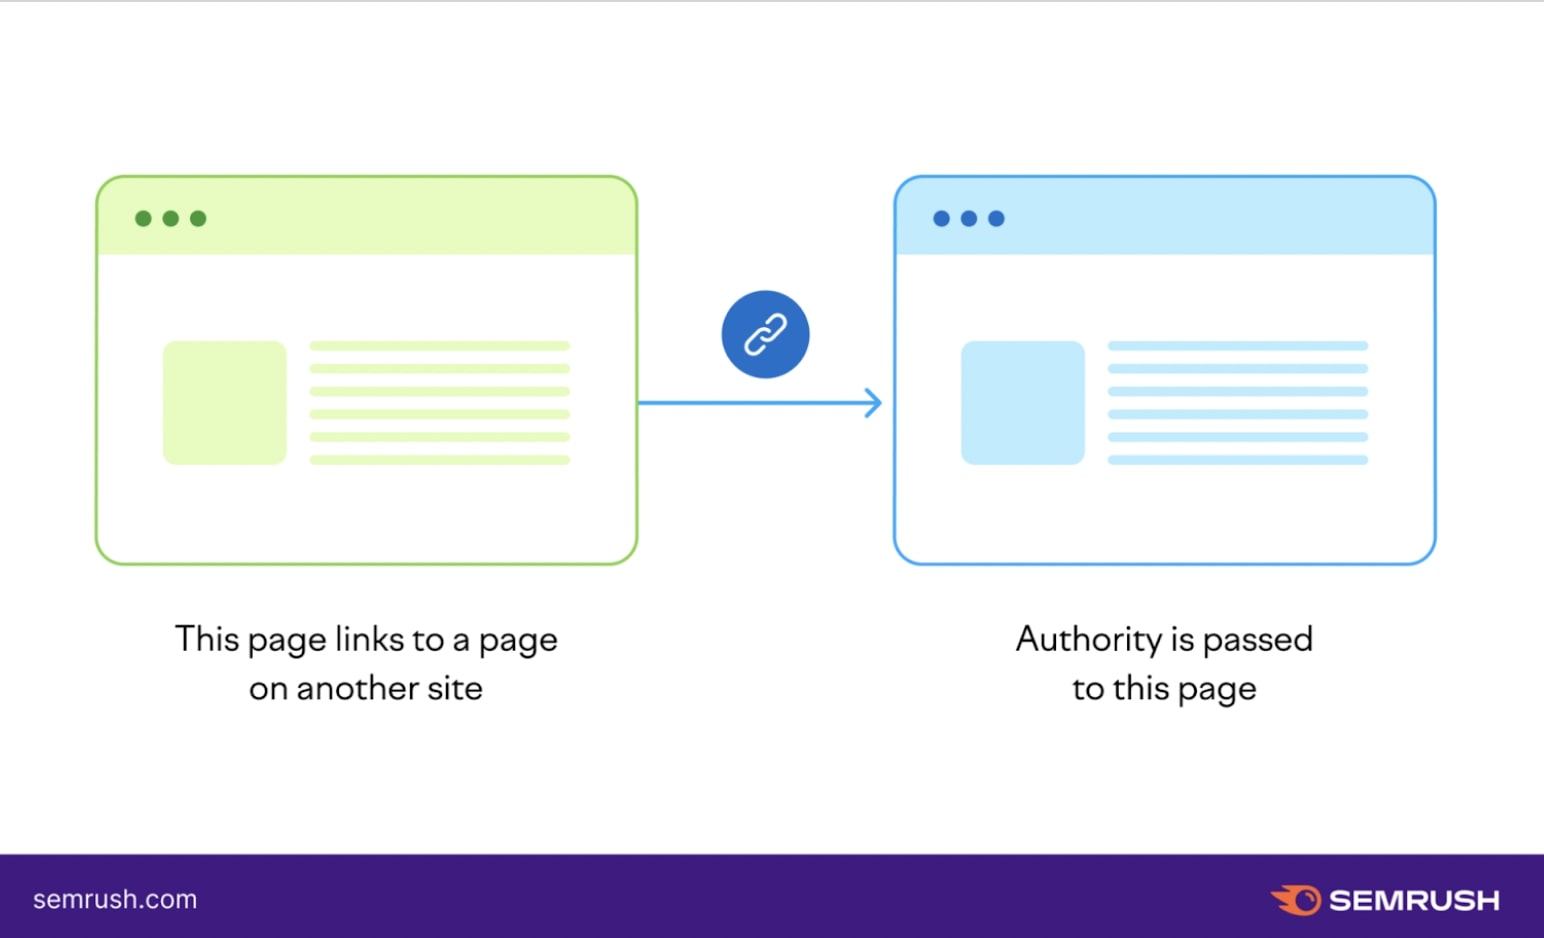 A page that links to another site passes authority to that site